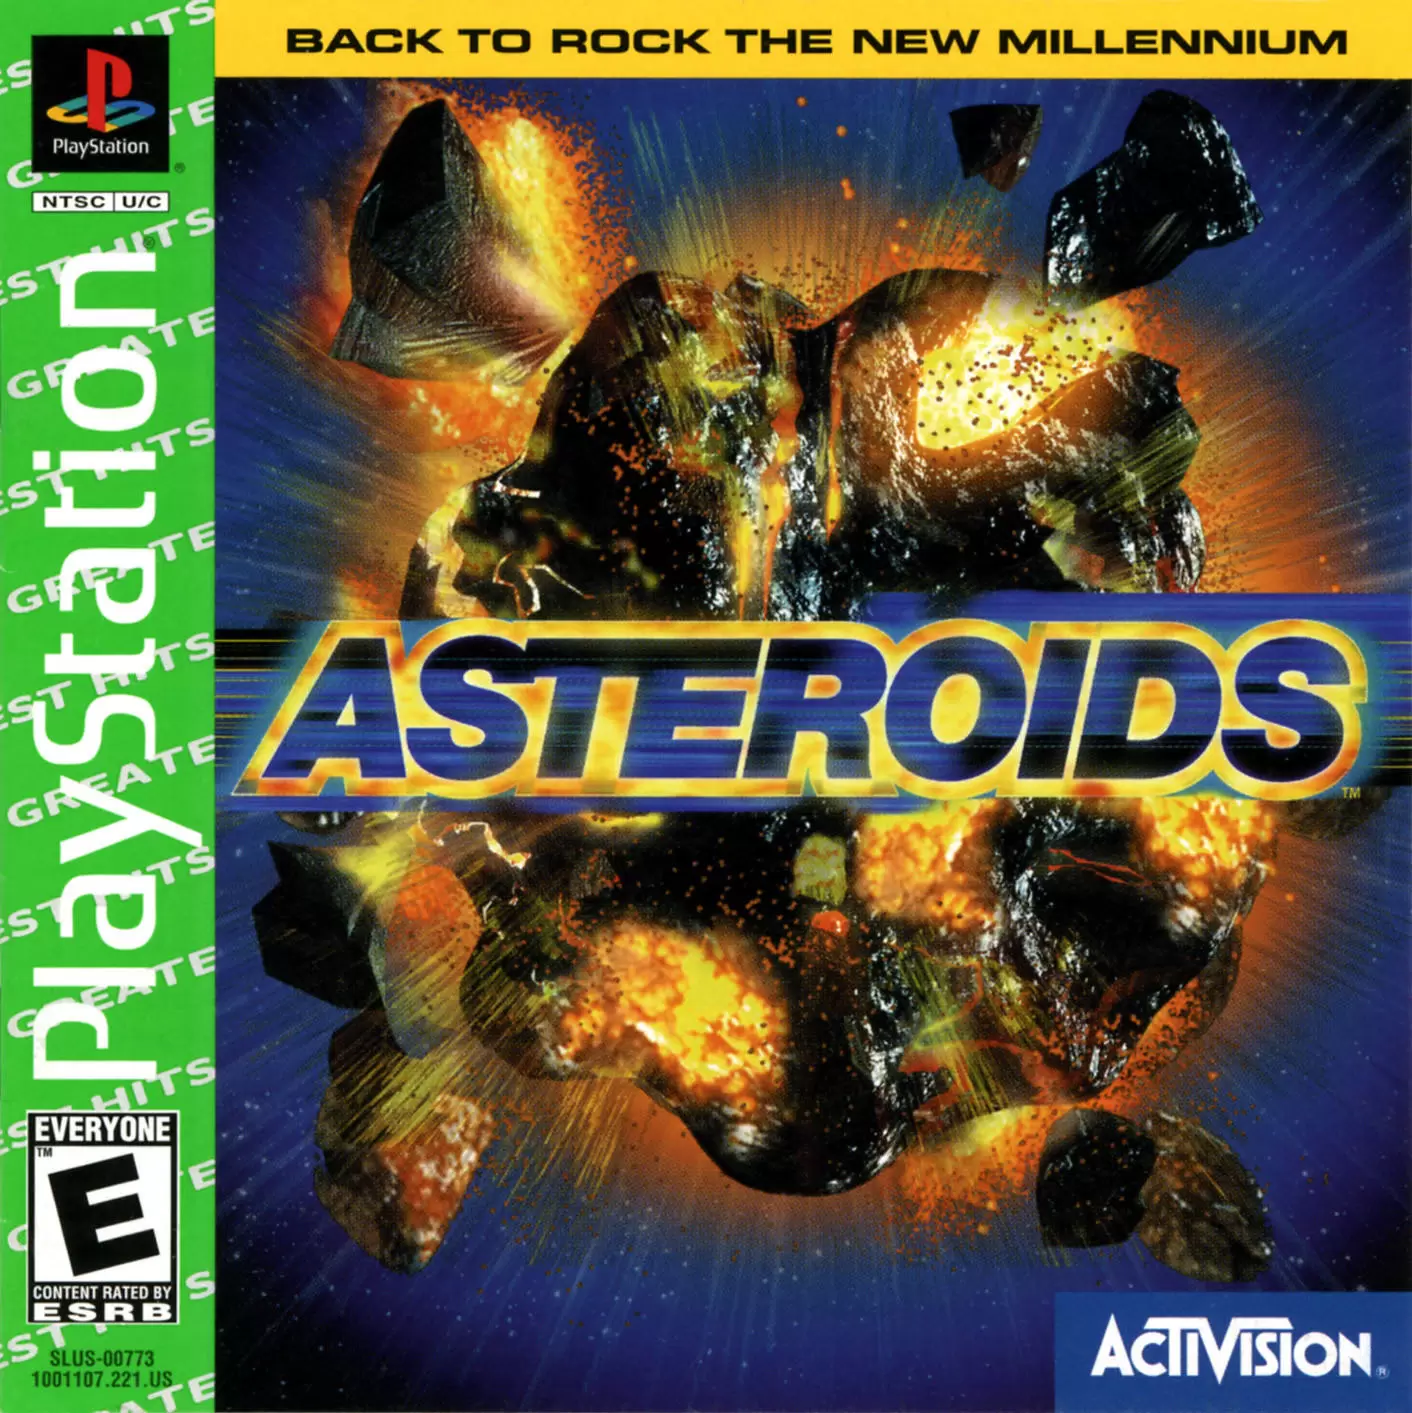 Playstation games - Asteroids